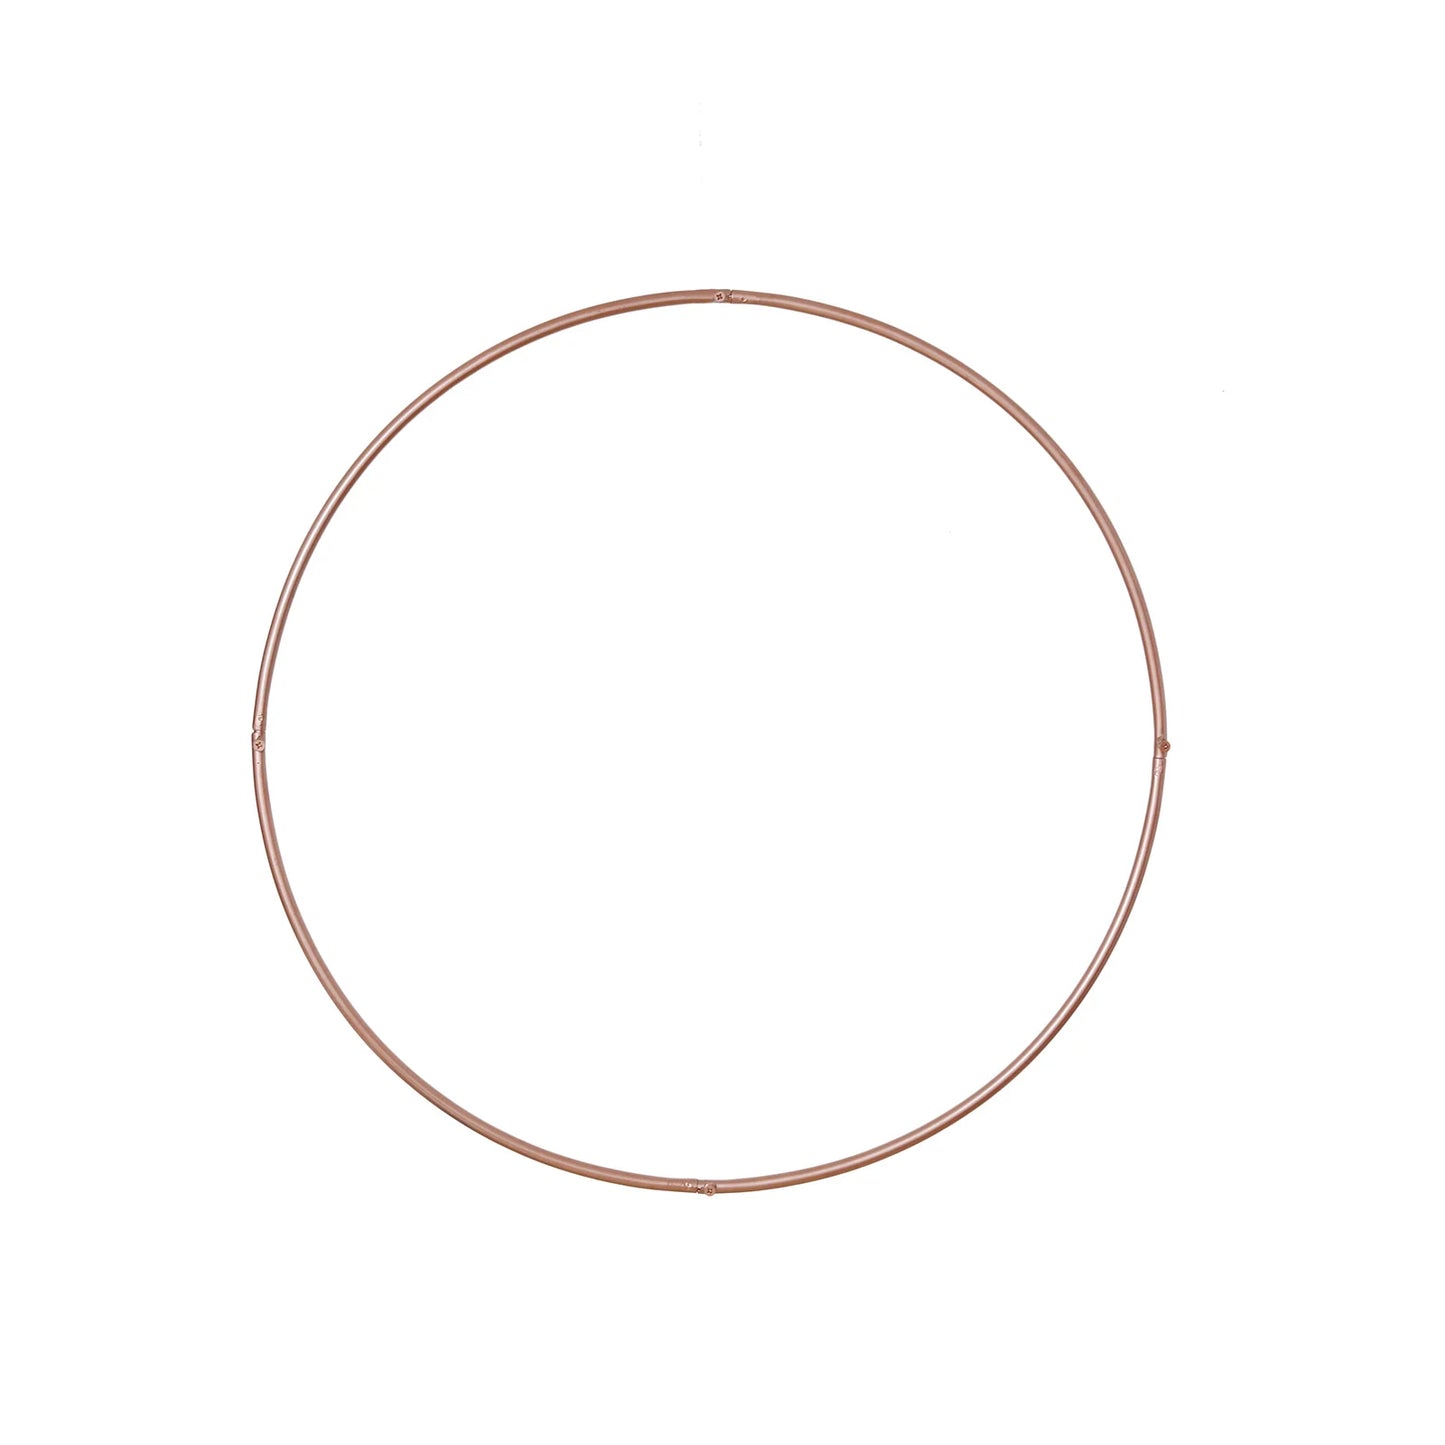 Heavy Duty Metal Hoop Wreath in Gold or Rose Gold varying sizes